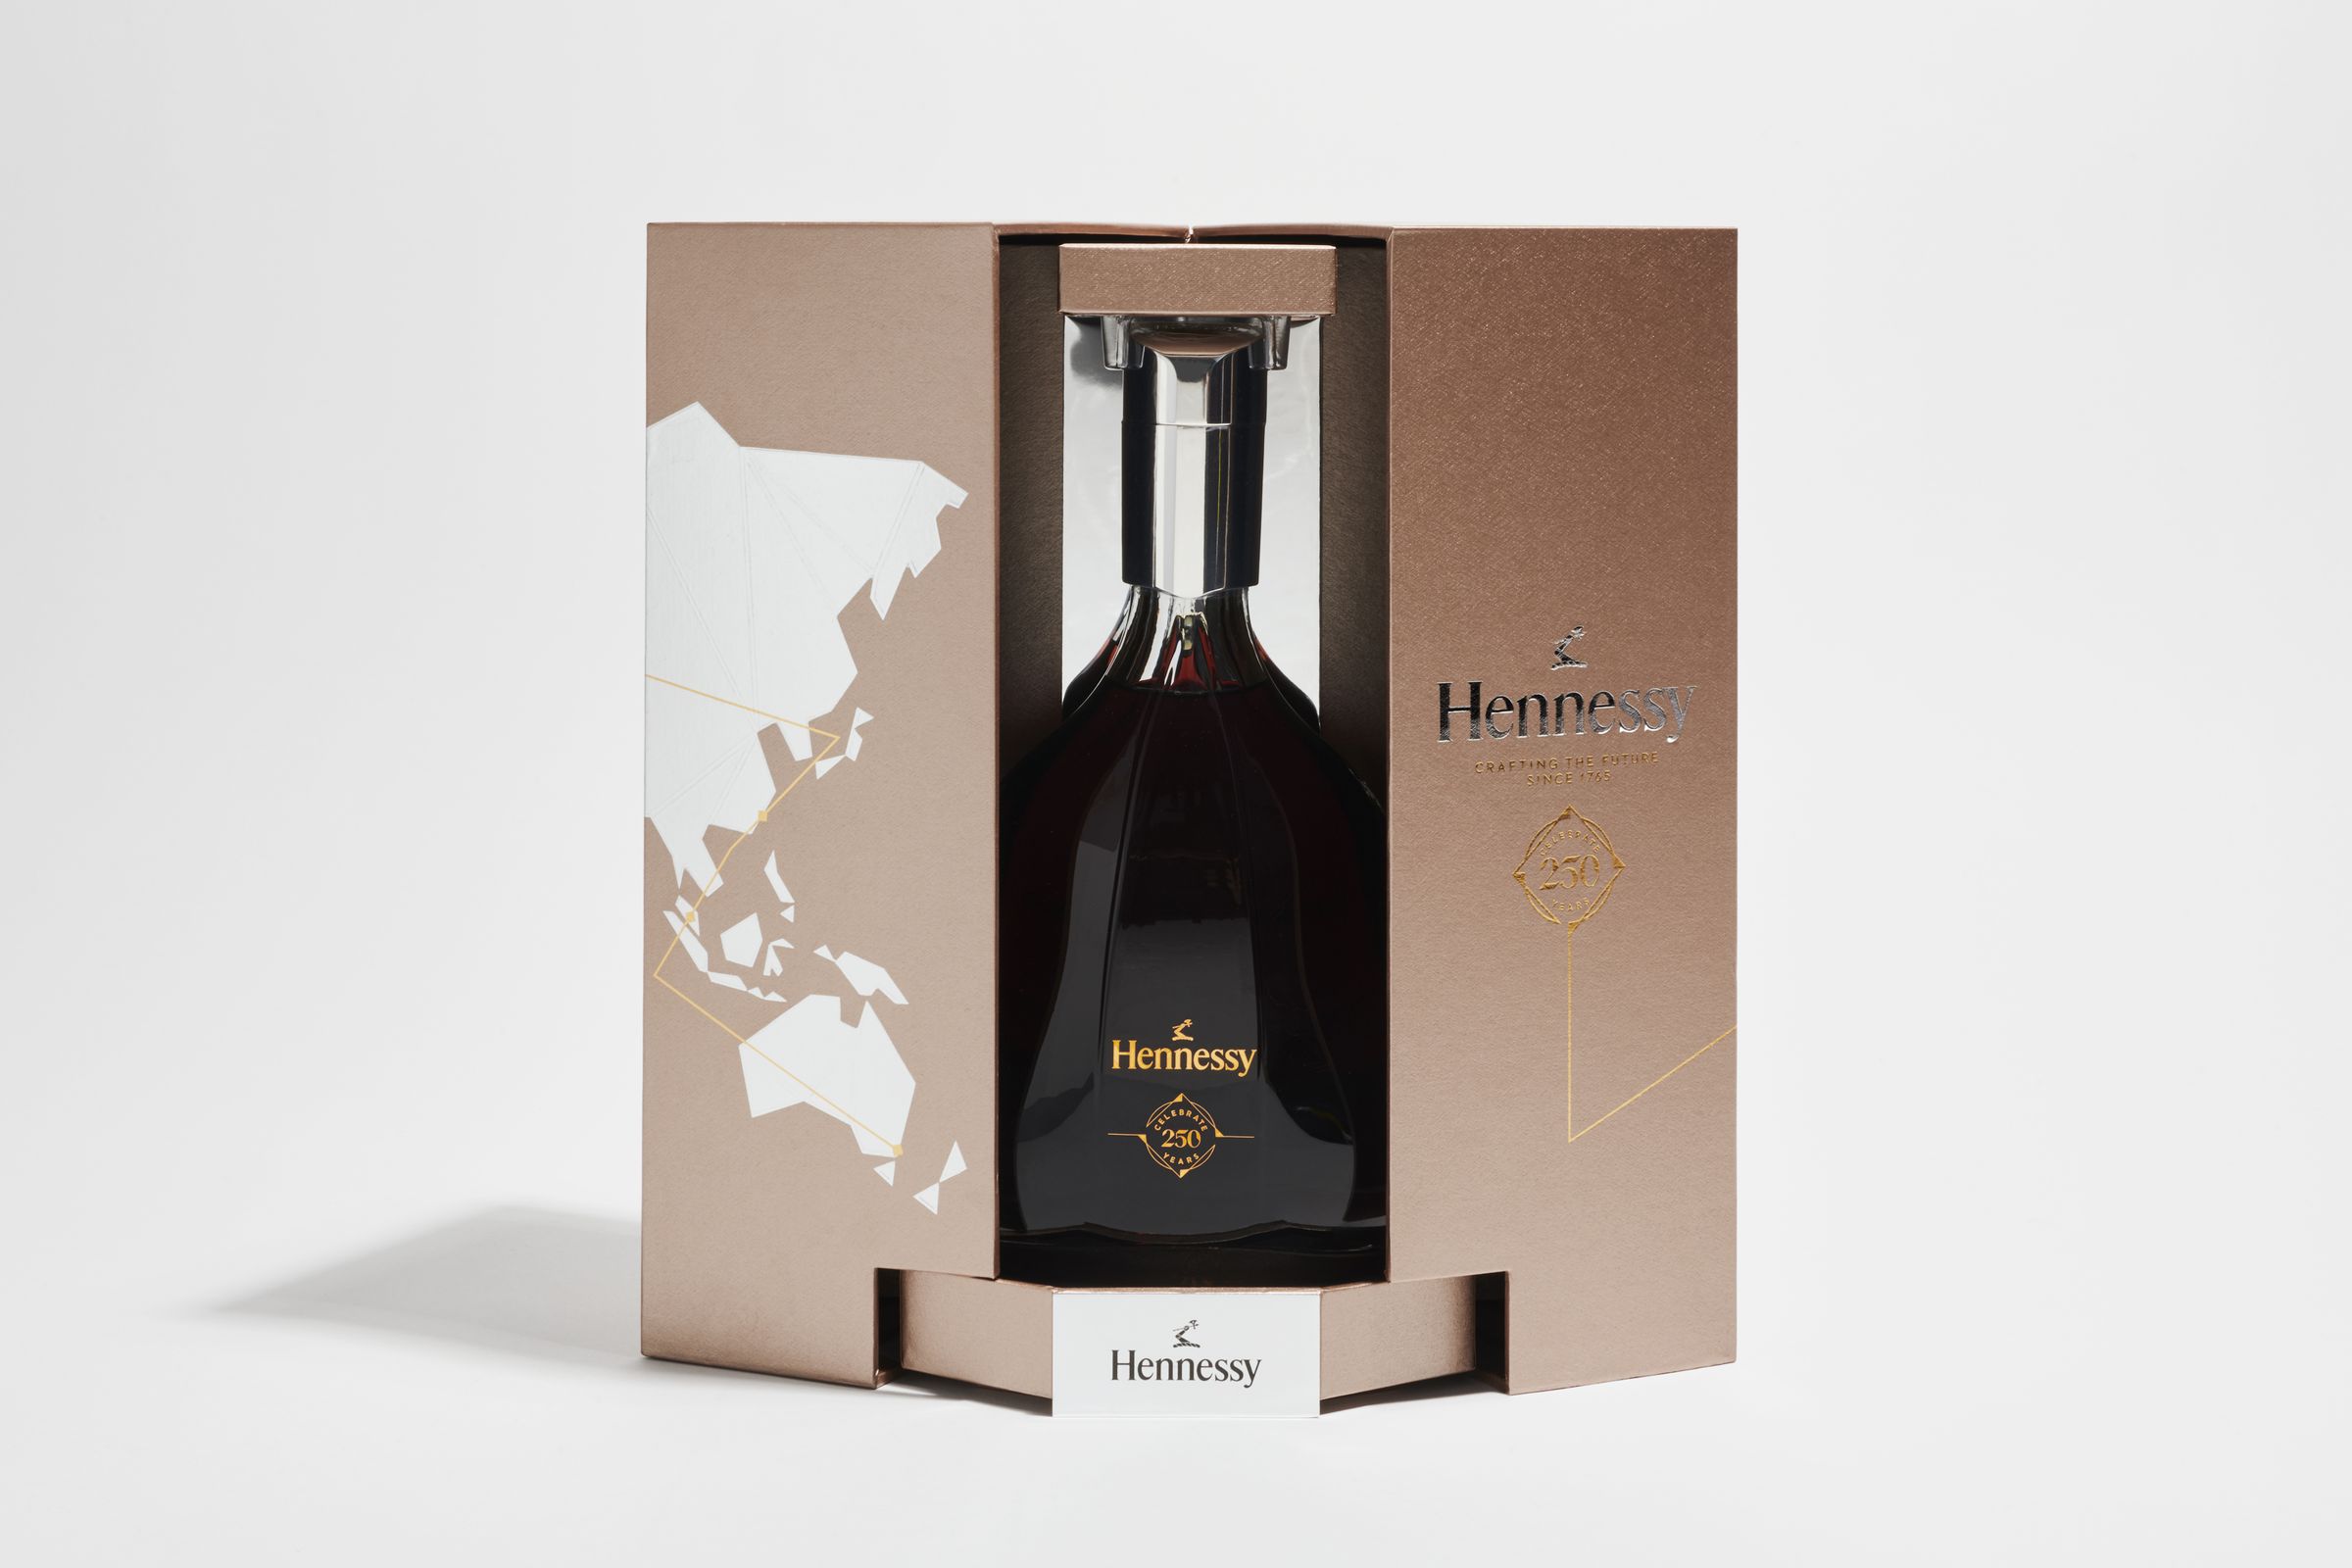 Hennessy 250 anniversary collector's blend box open with logo applied